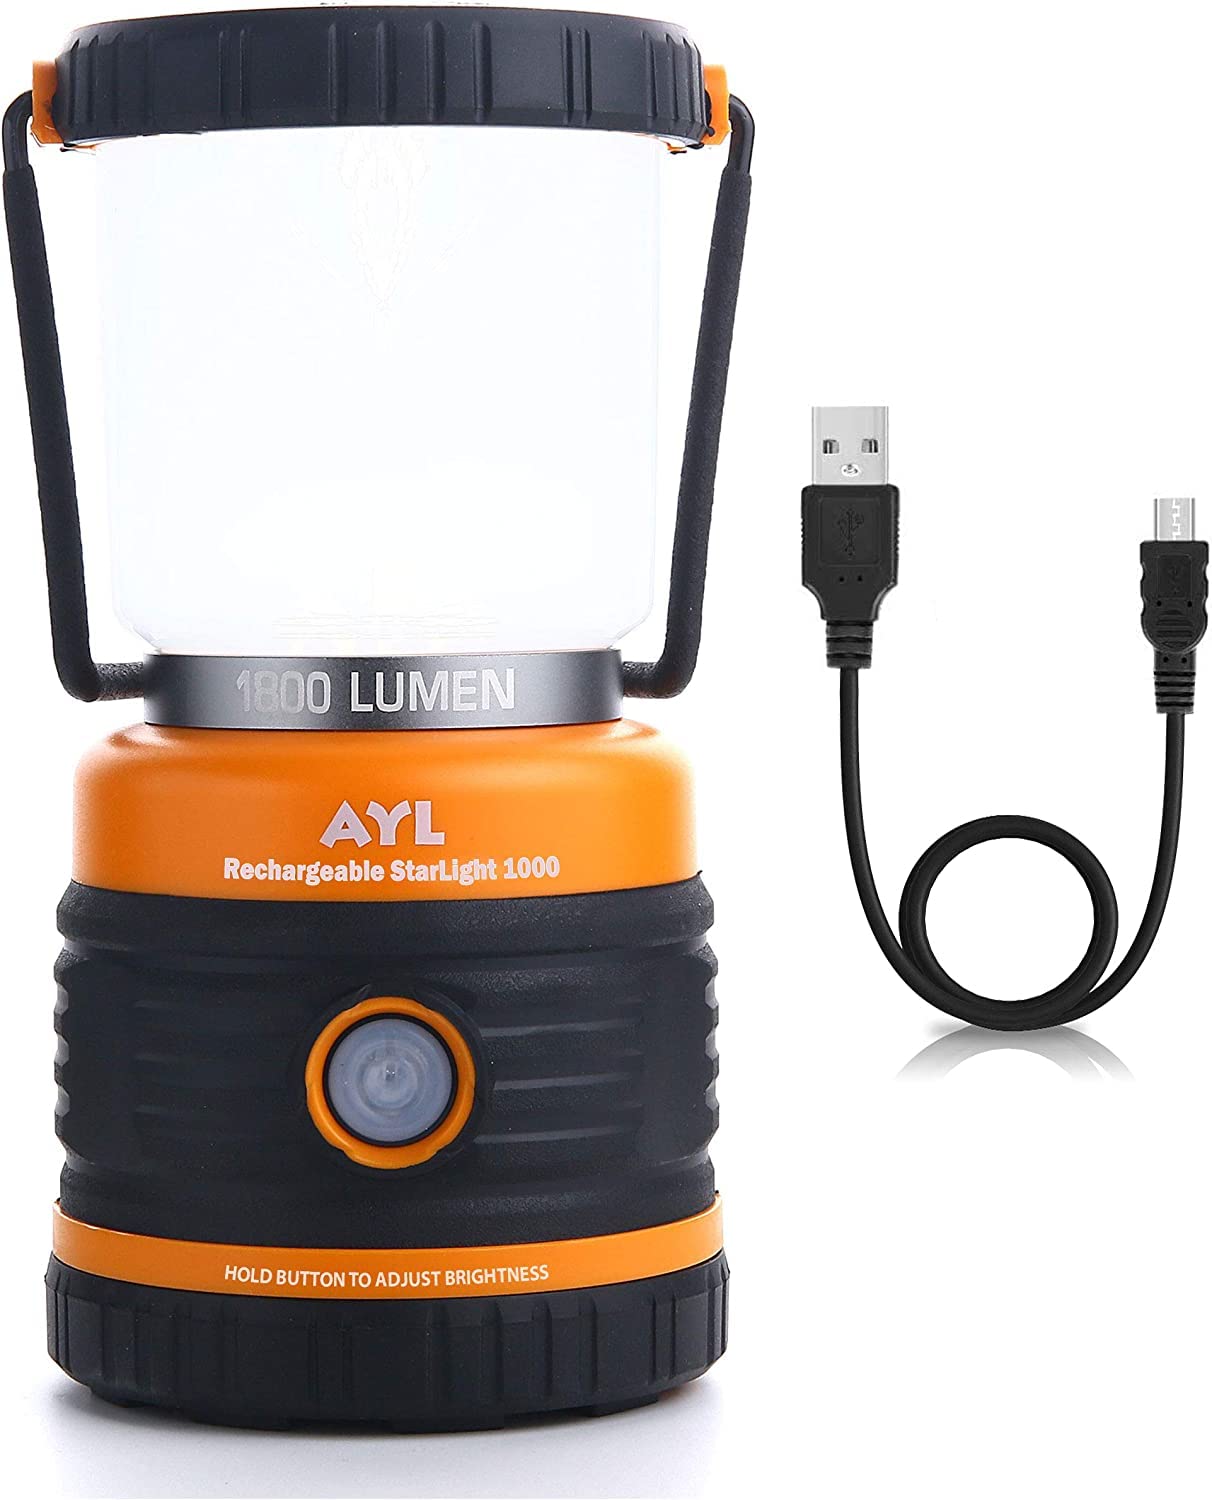 Led Camping Lantern & Usb Rechargeable Flashlight With Power Bank Function